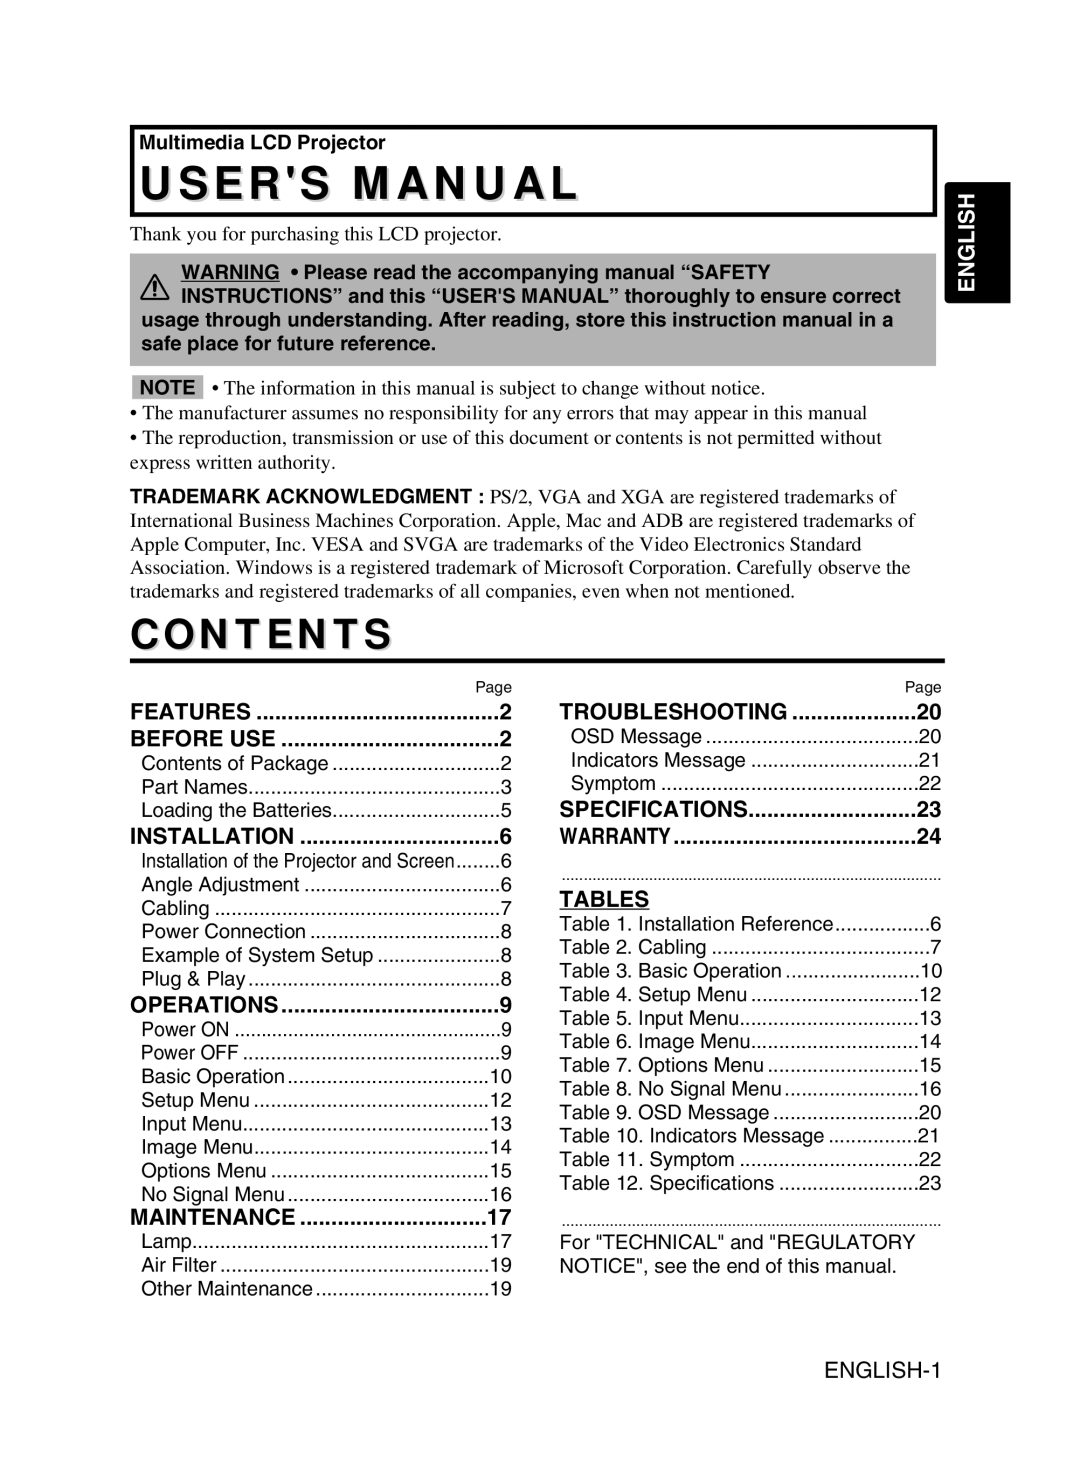 BOXLIGHT CP-775I user manual Contents, English, Tables, ENGLISH-1, Users Manual 